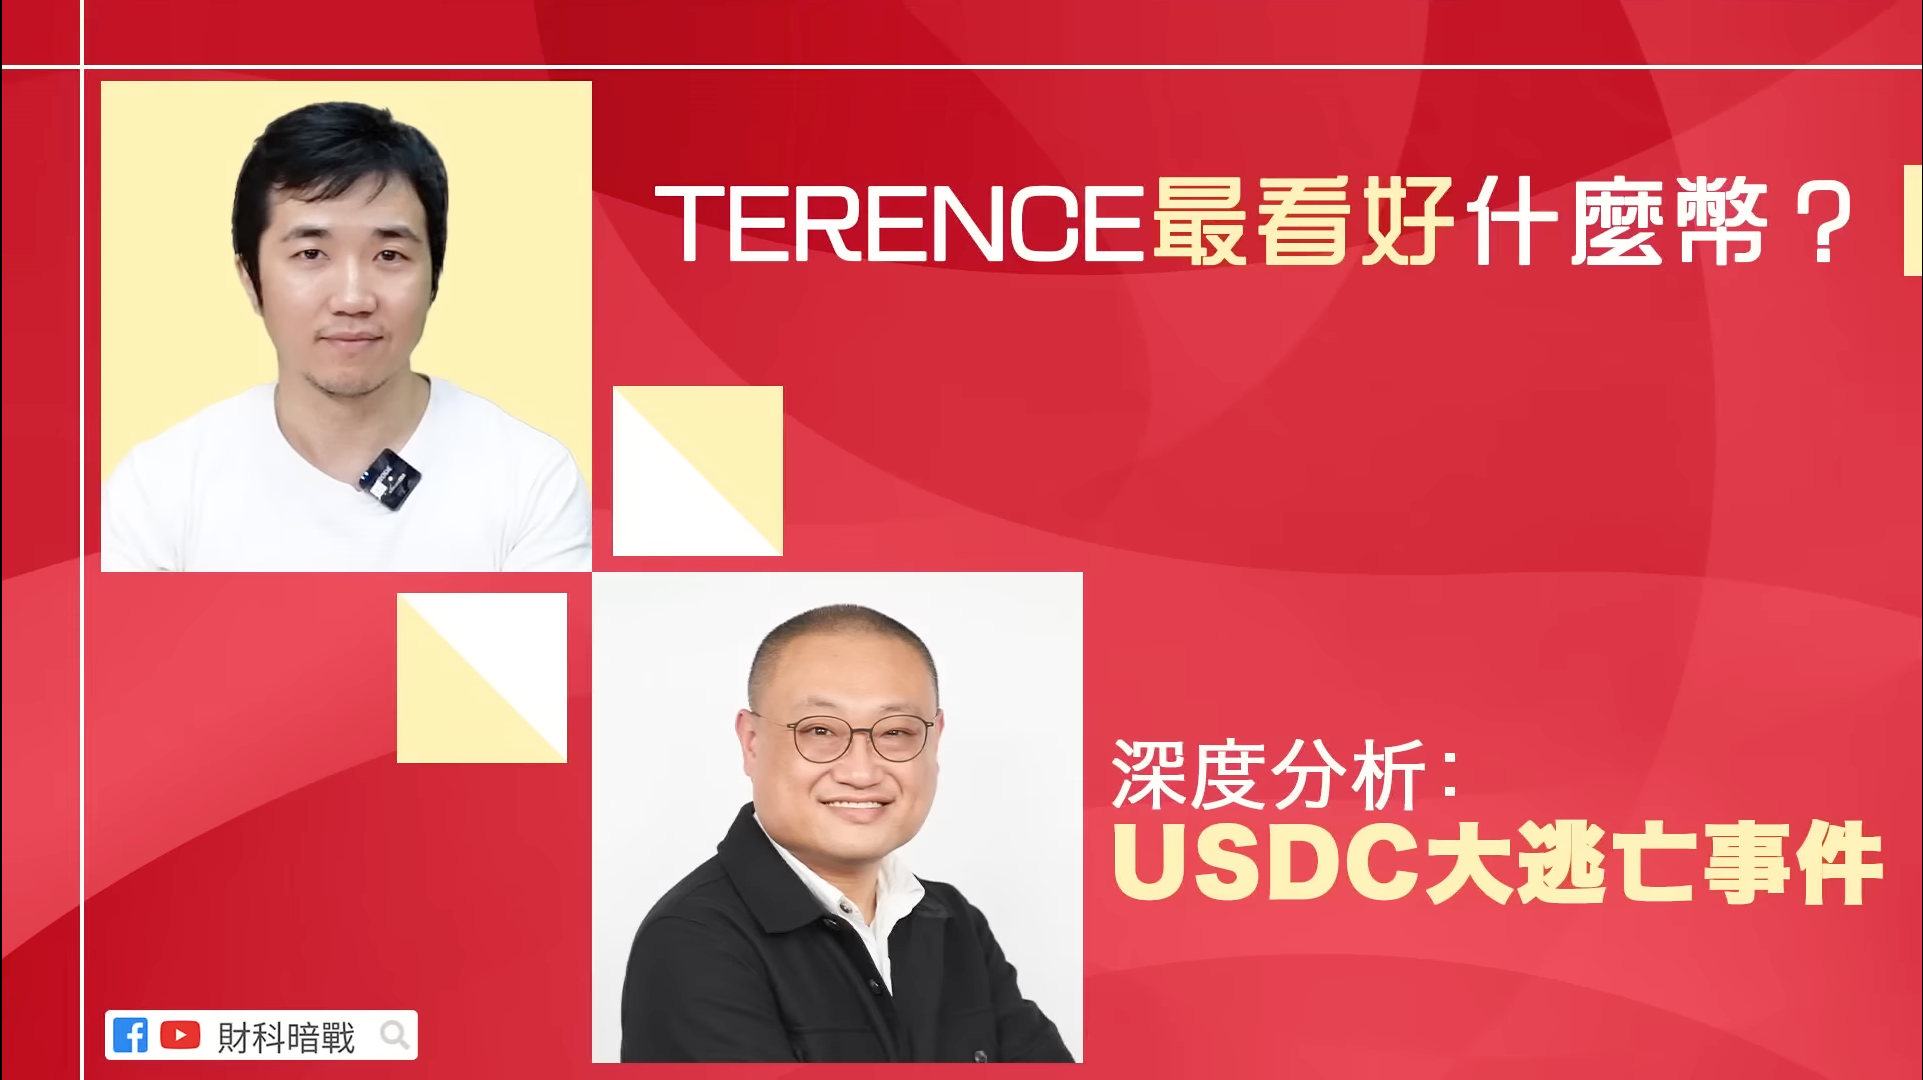 Interview with Terence Lam: the man who invested SOL at $0.25, story of Forbole and USDC crisis